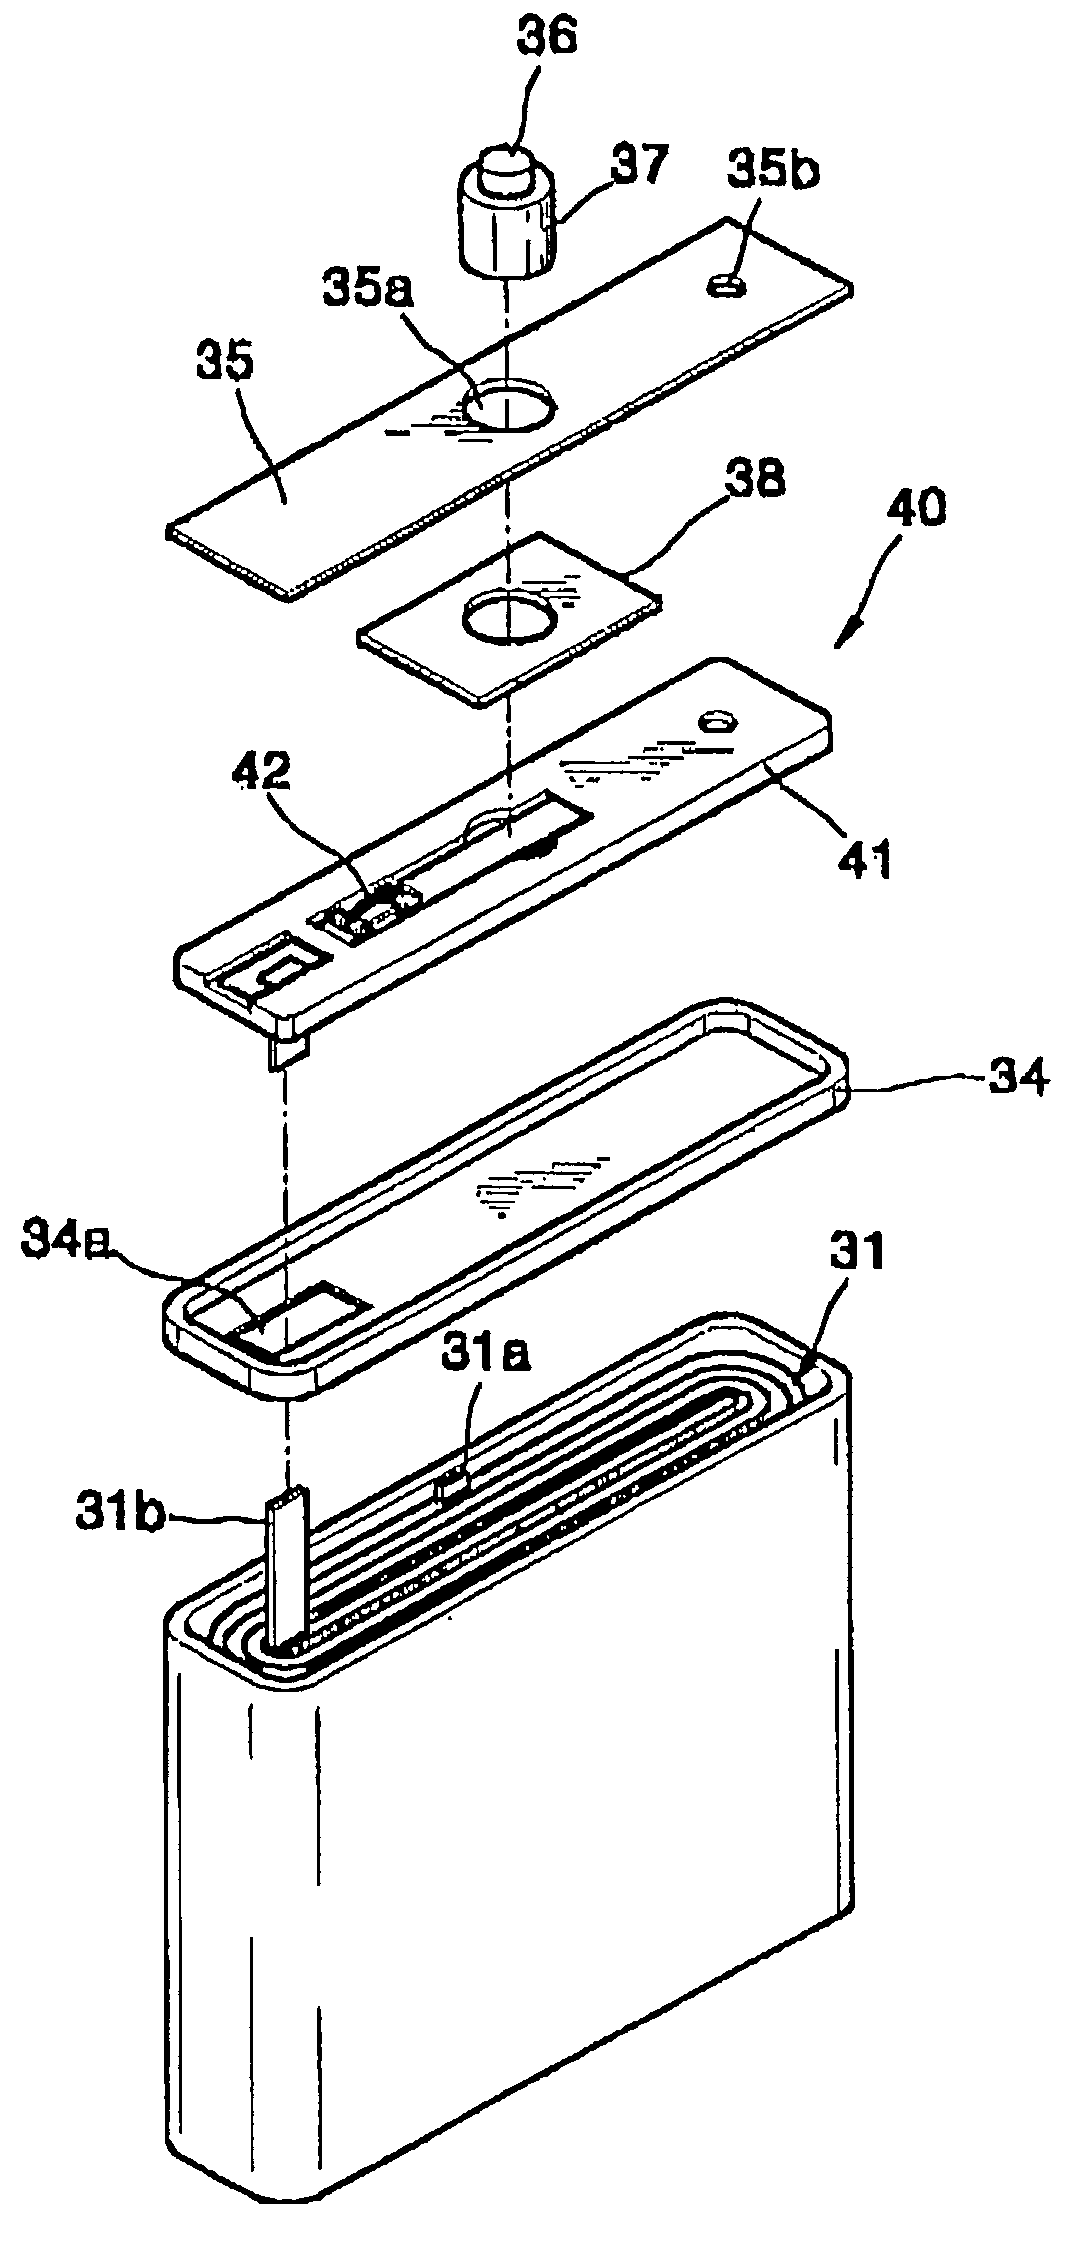 Secondary battery with thermal protector